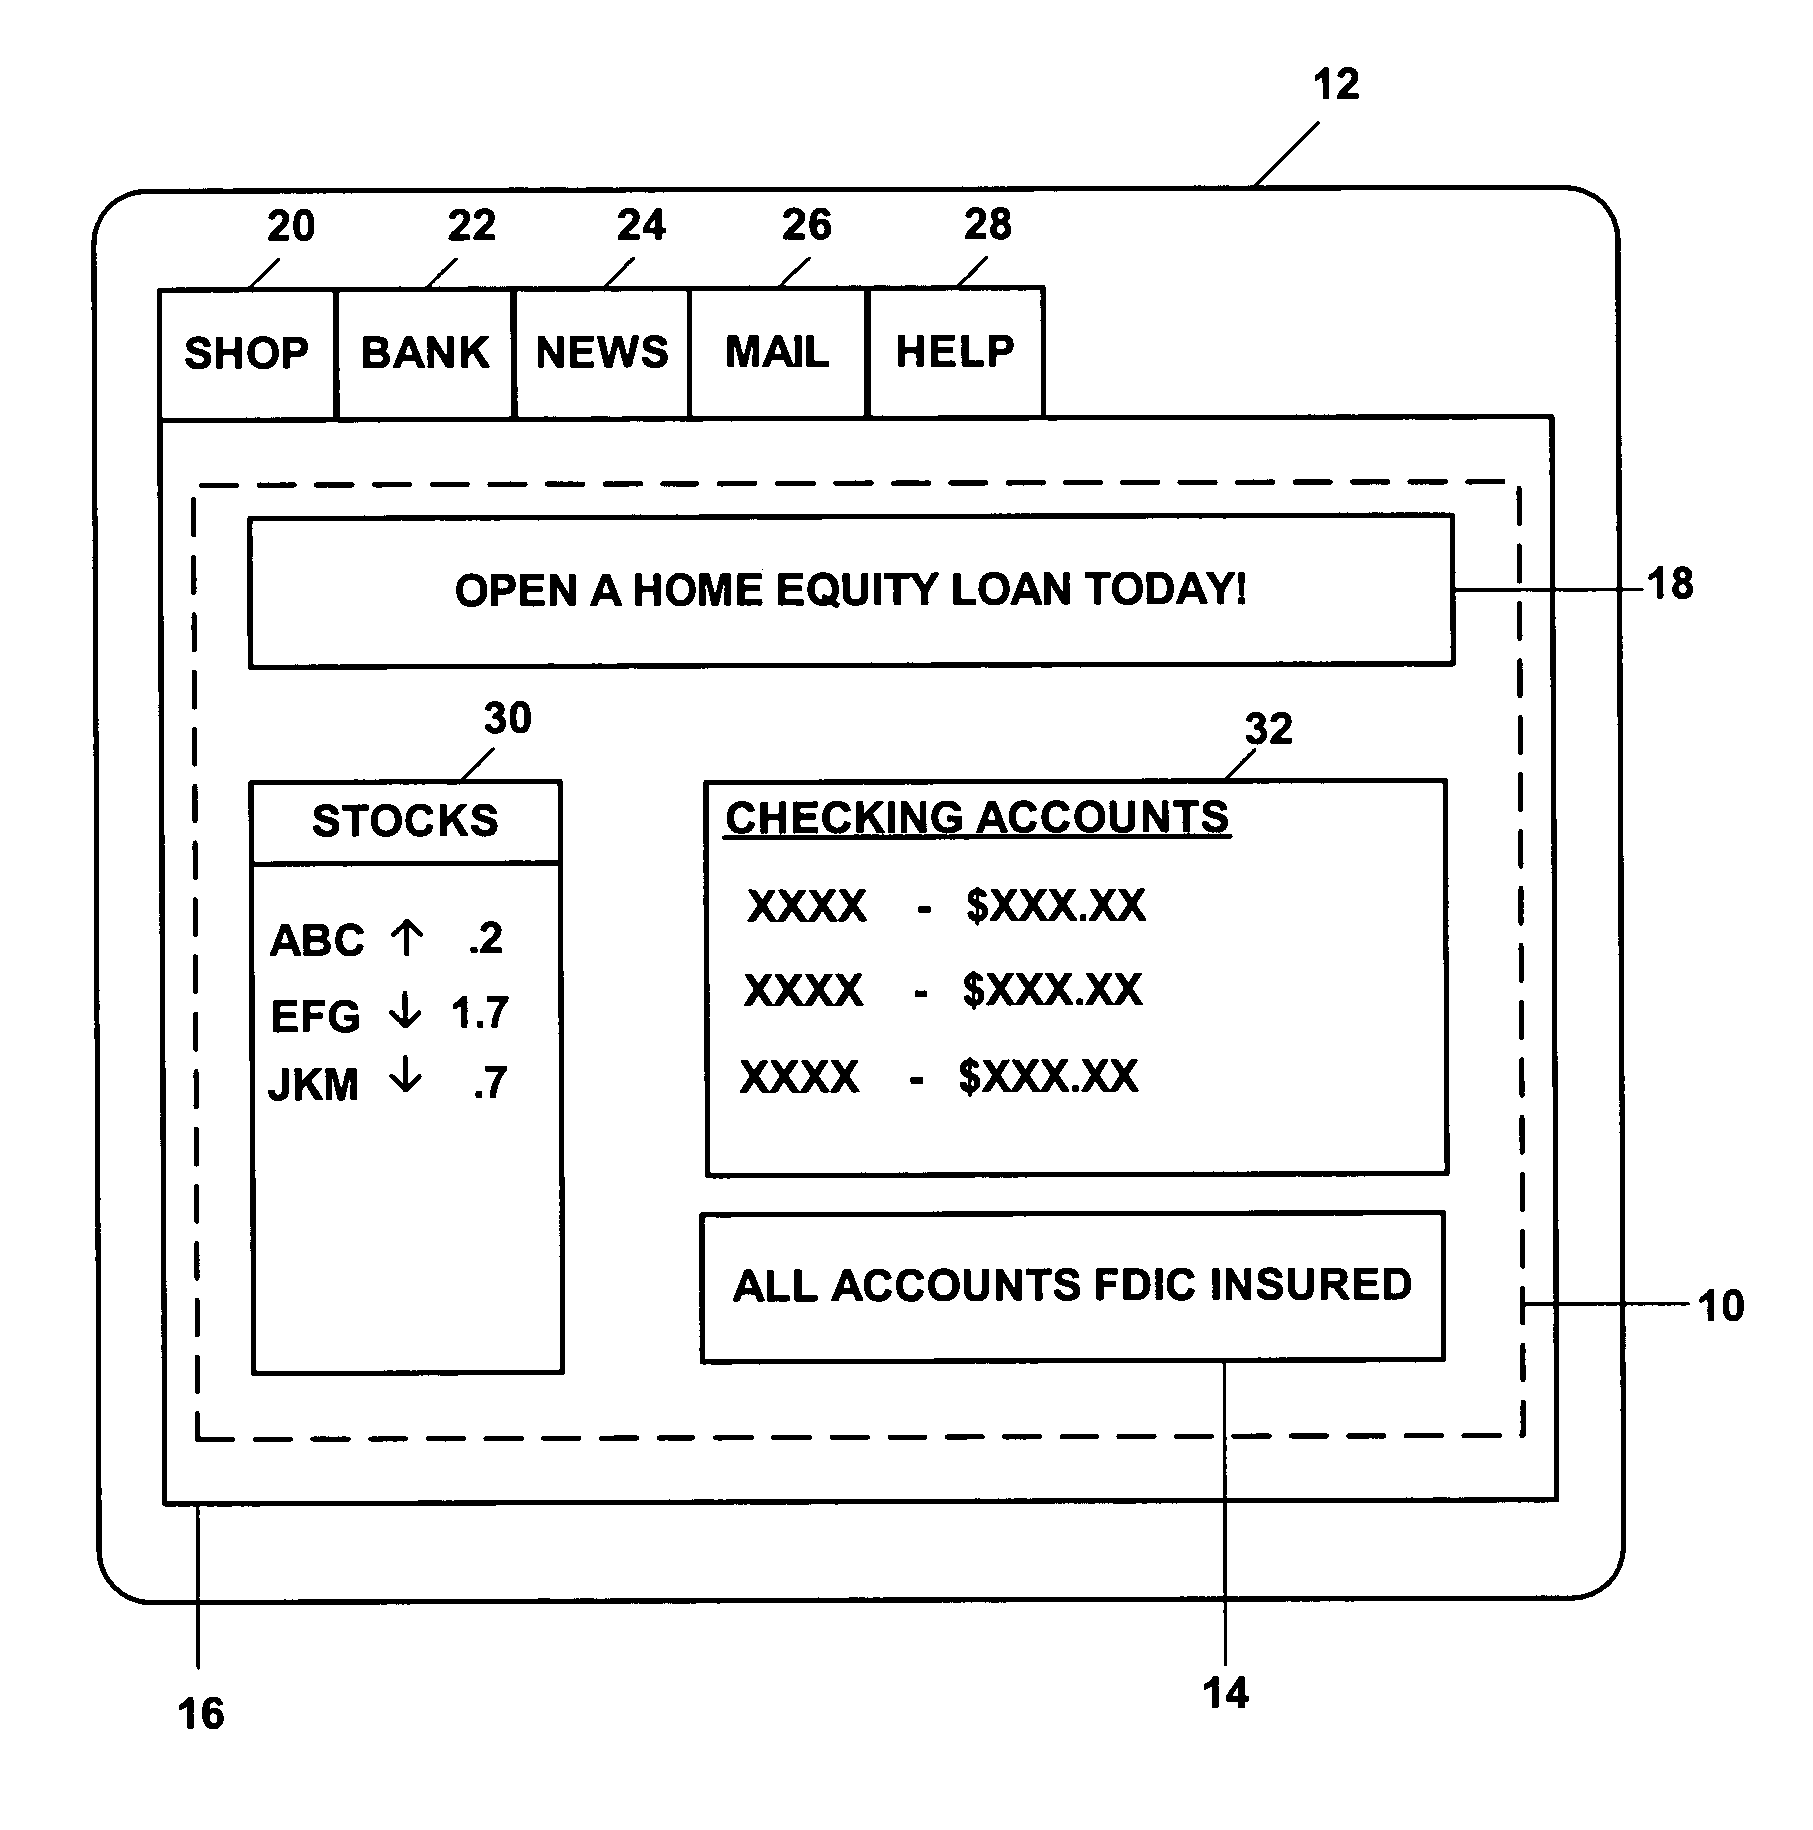 Method for entitling a user interface